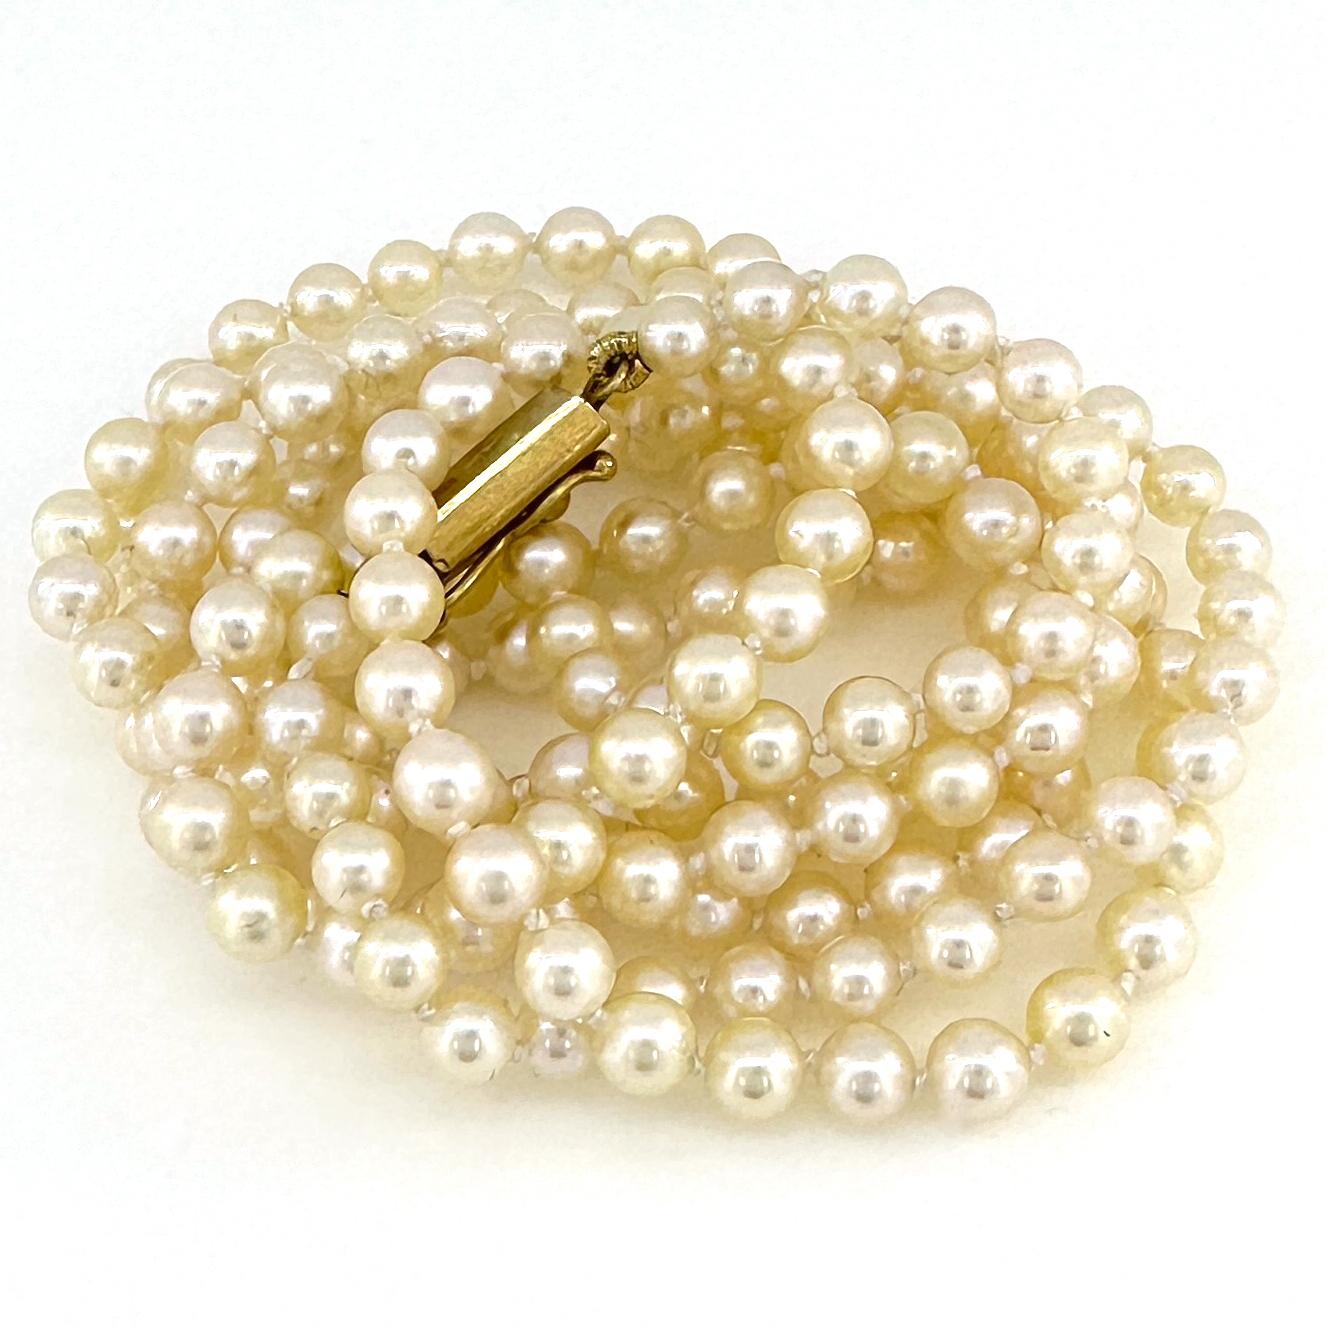 Contemporary Opera Length Strand of Japanese Akoya Cultured Pearls with 14k Gold Clasp